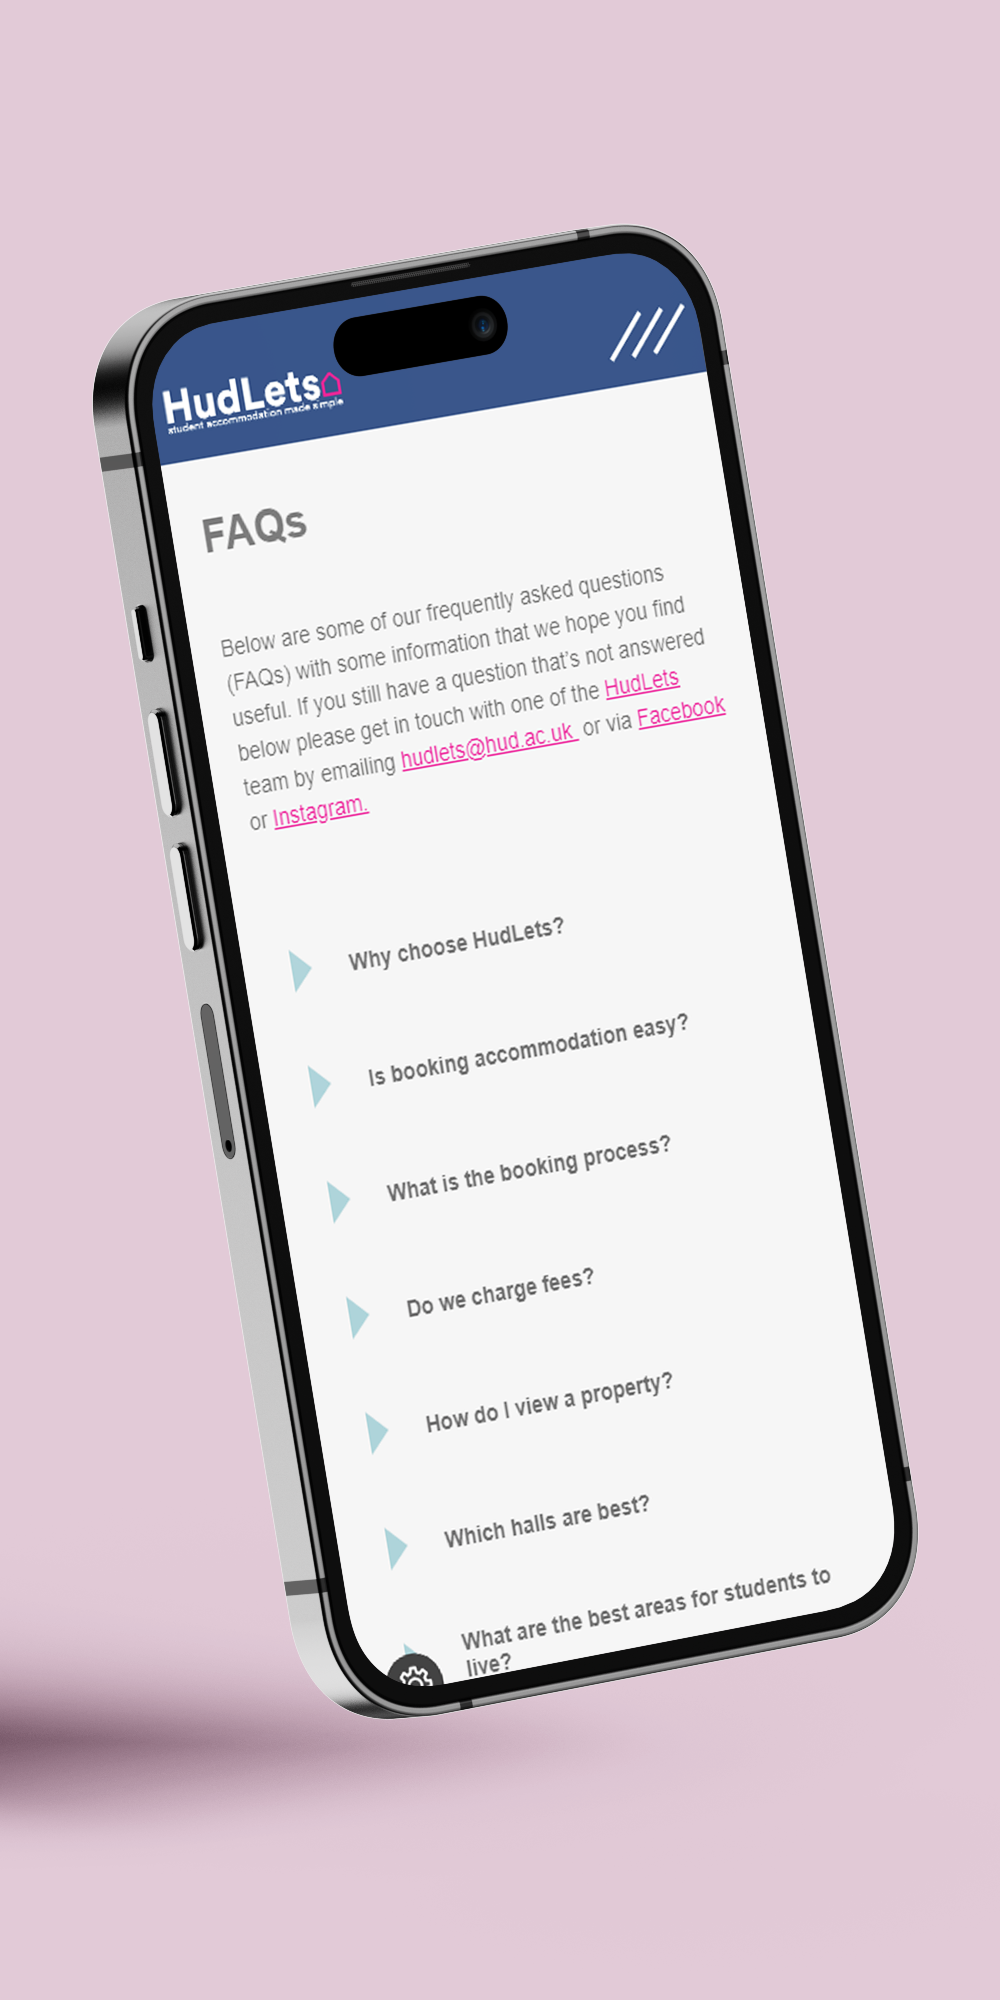 Hudlets FAQ page shown on a phone screen